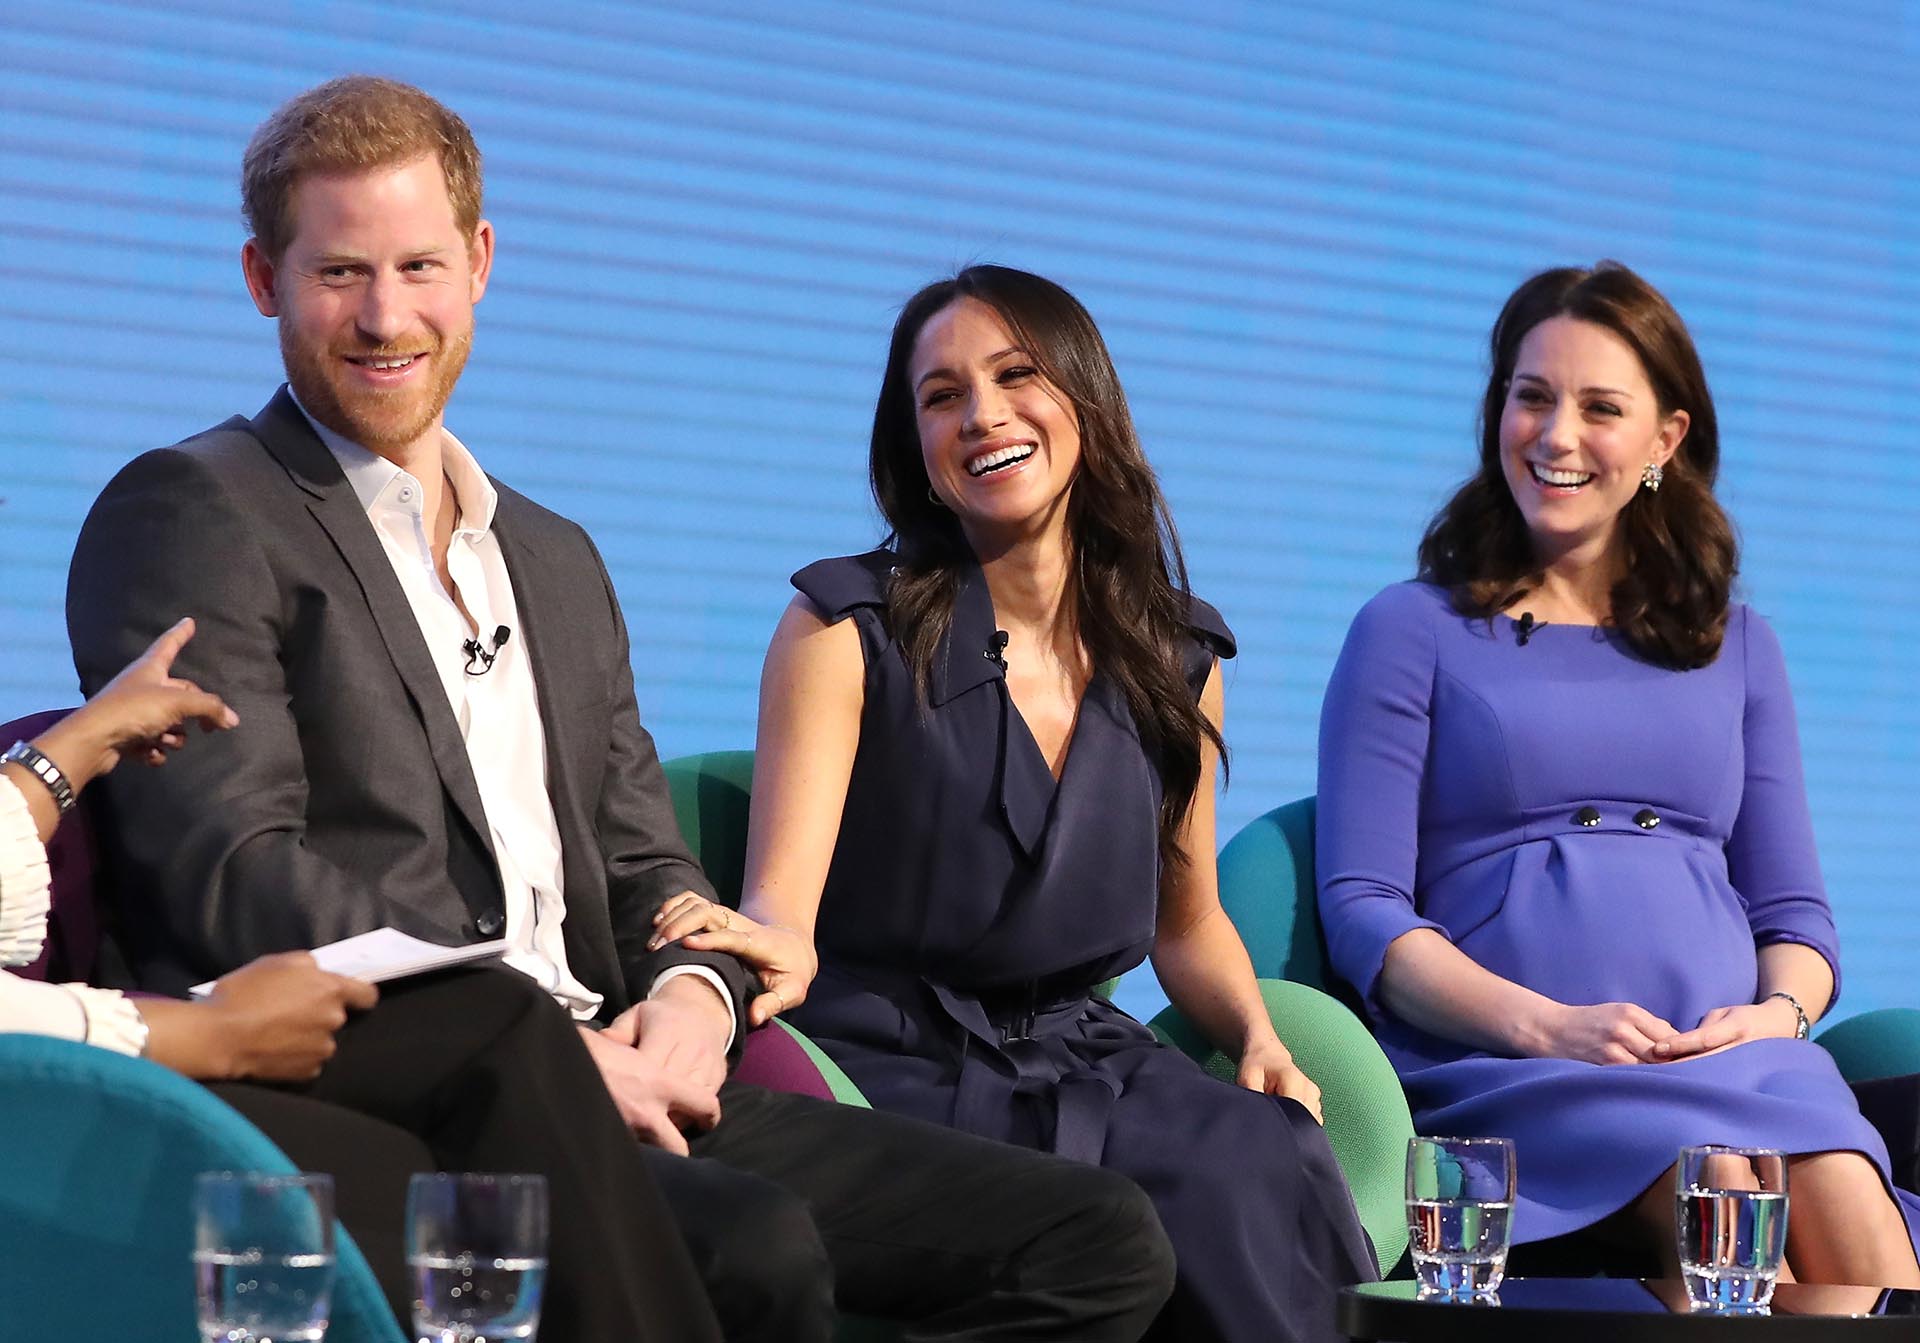 Prince Harry, Meghan Markle, and the Duchess of Cambridge attend the first annual Royal Foundation Forum on February 28, 2018 in London (AFP)